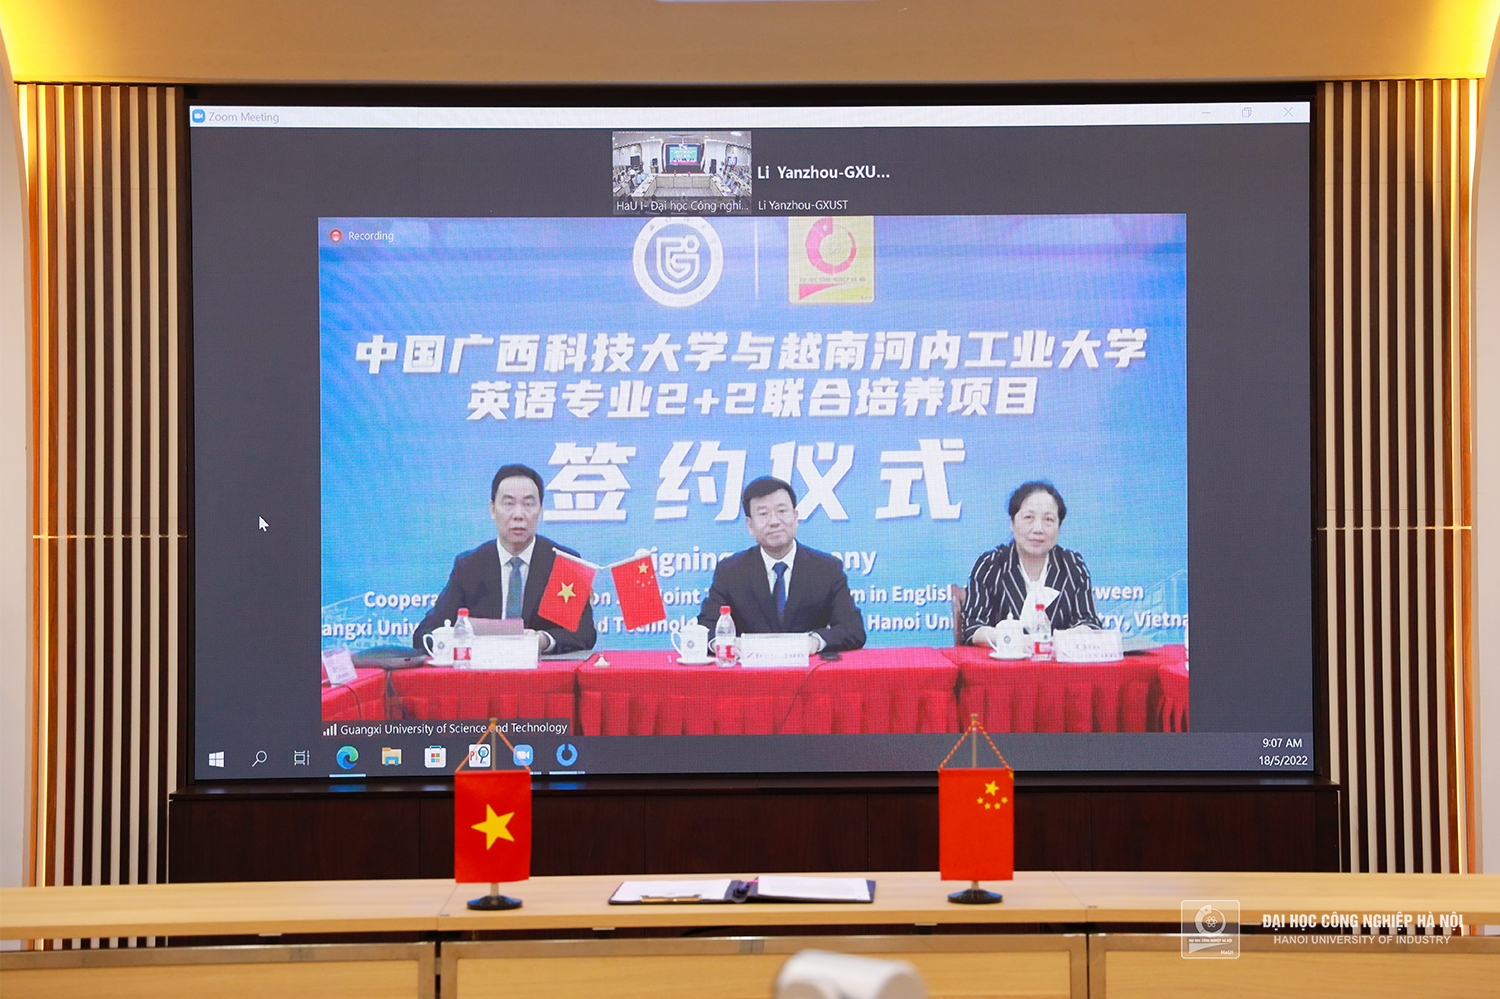 The signing ceremony on cooperation agreement between Hanoi University of Industry and Guangxi University of Science and Technology